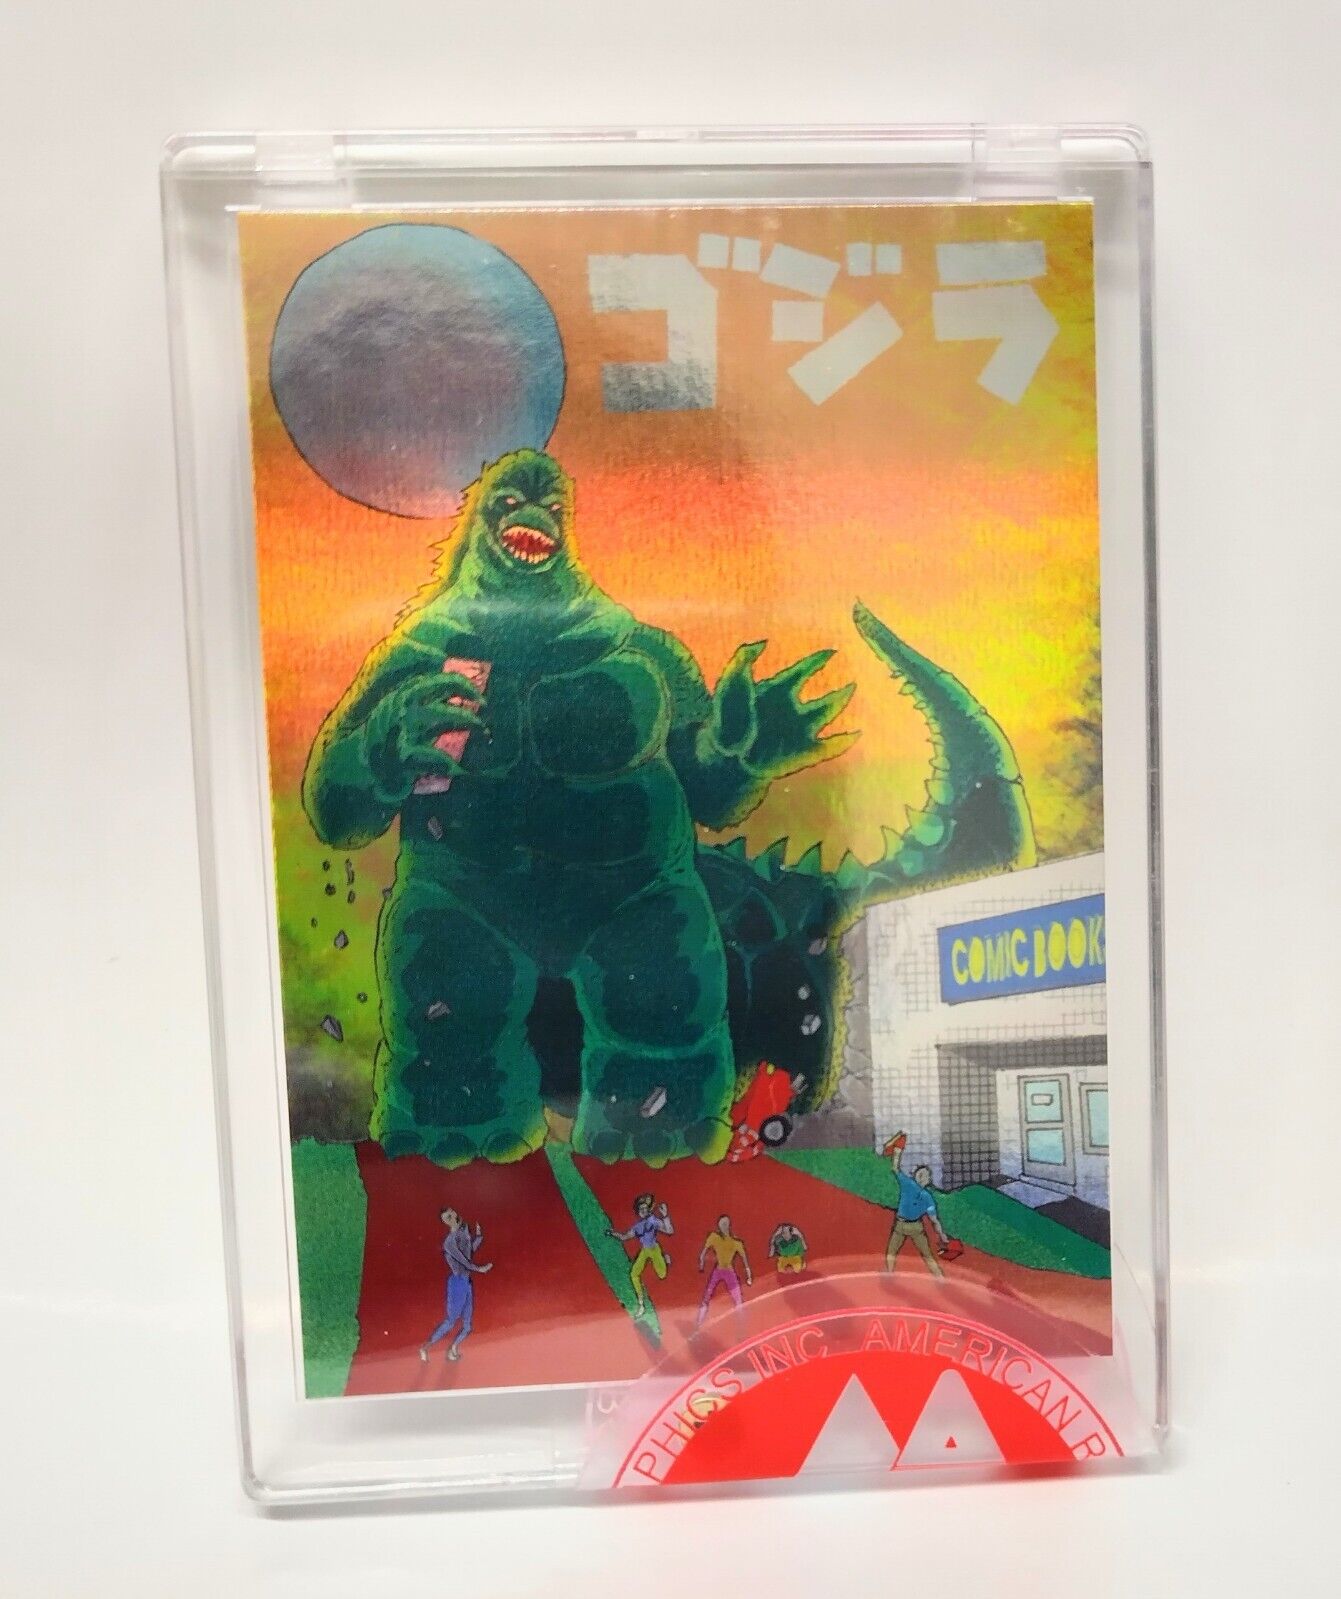 Godzilla Day 2022 ARG PFLB Store Exclusive Holofoil Trading Card Signed # (NEW )